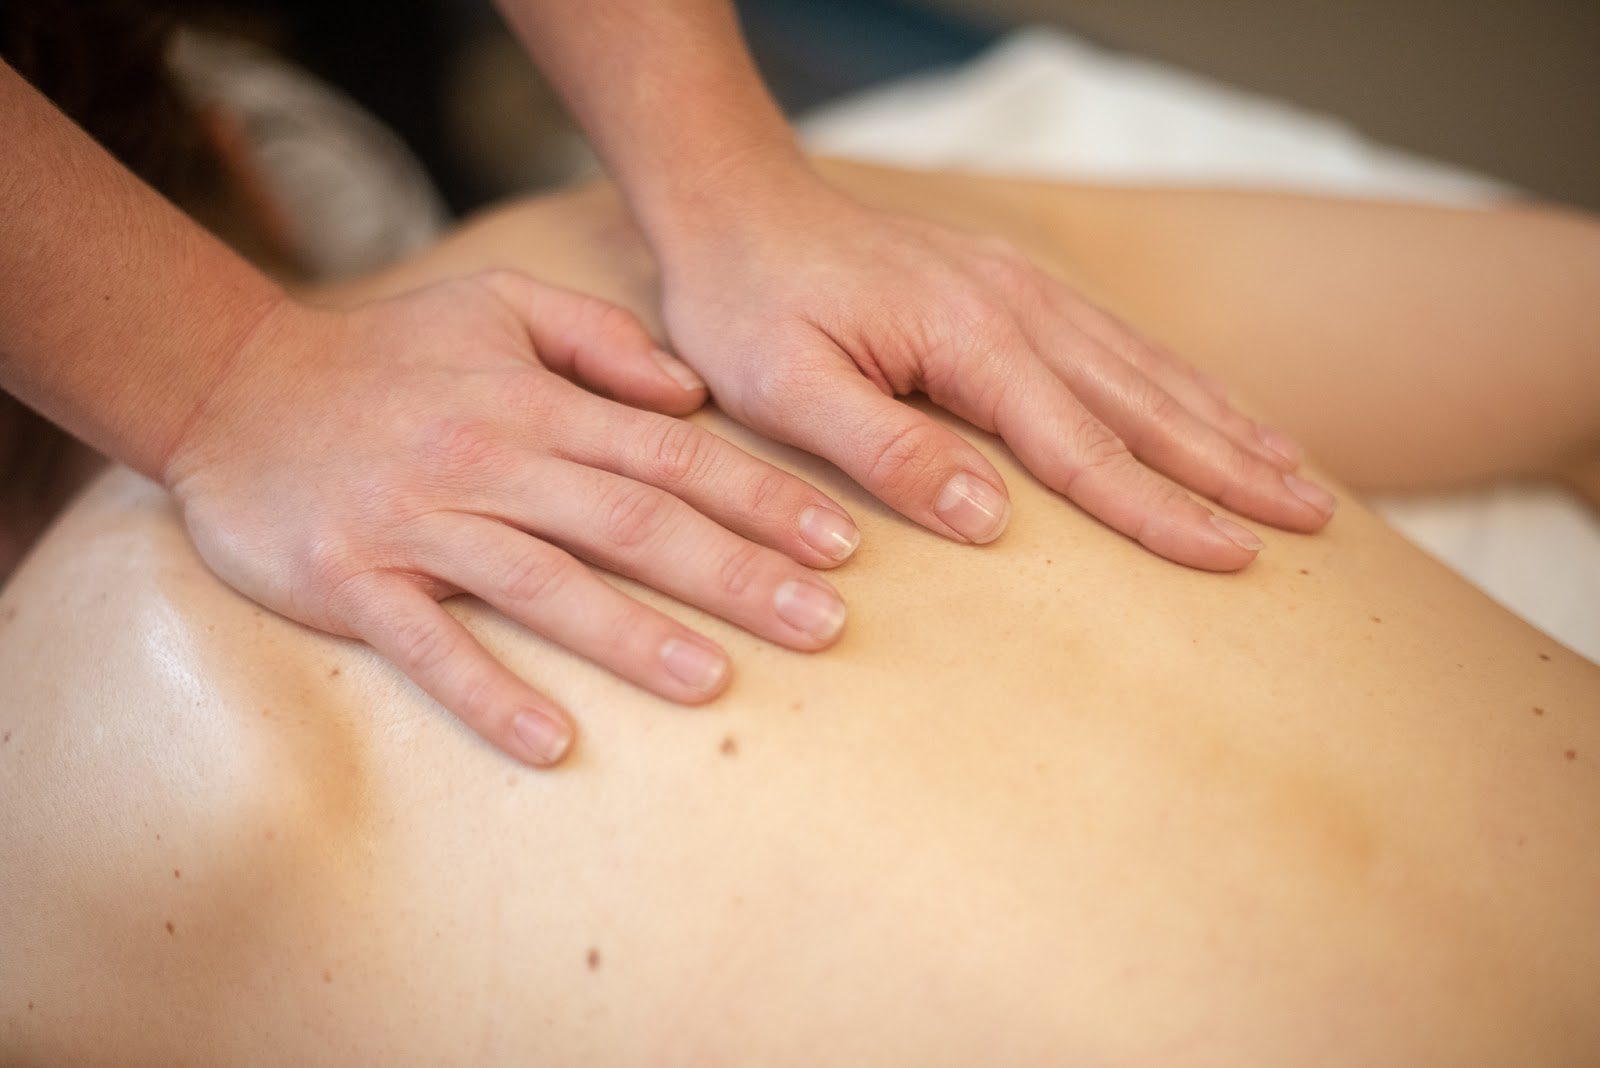 Massage therapy: masseuse has hands on patient's back